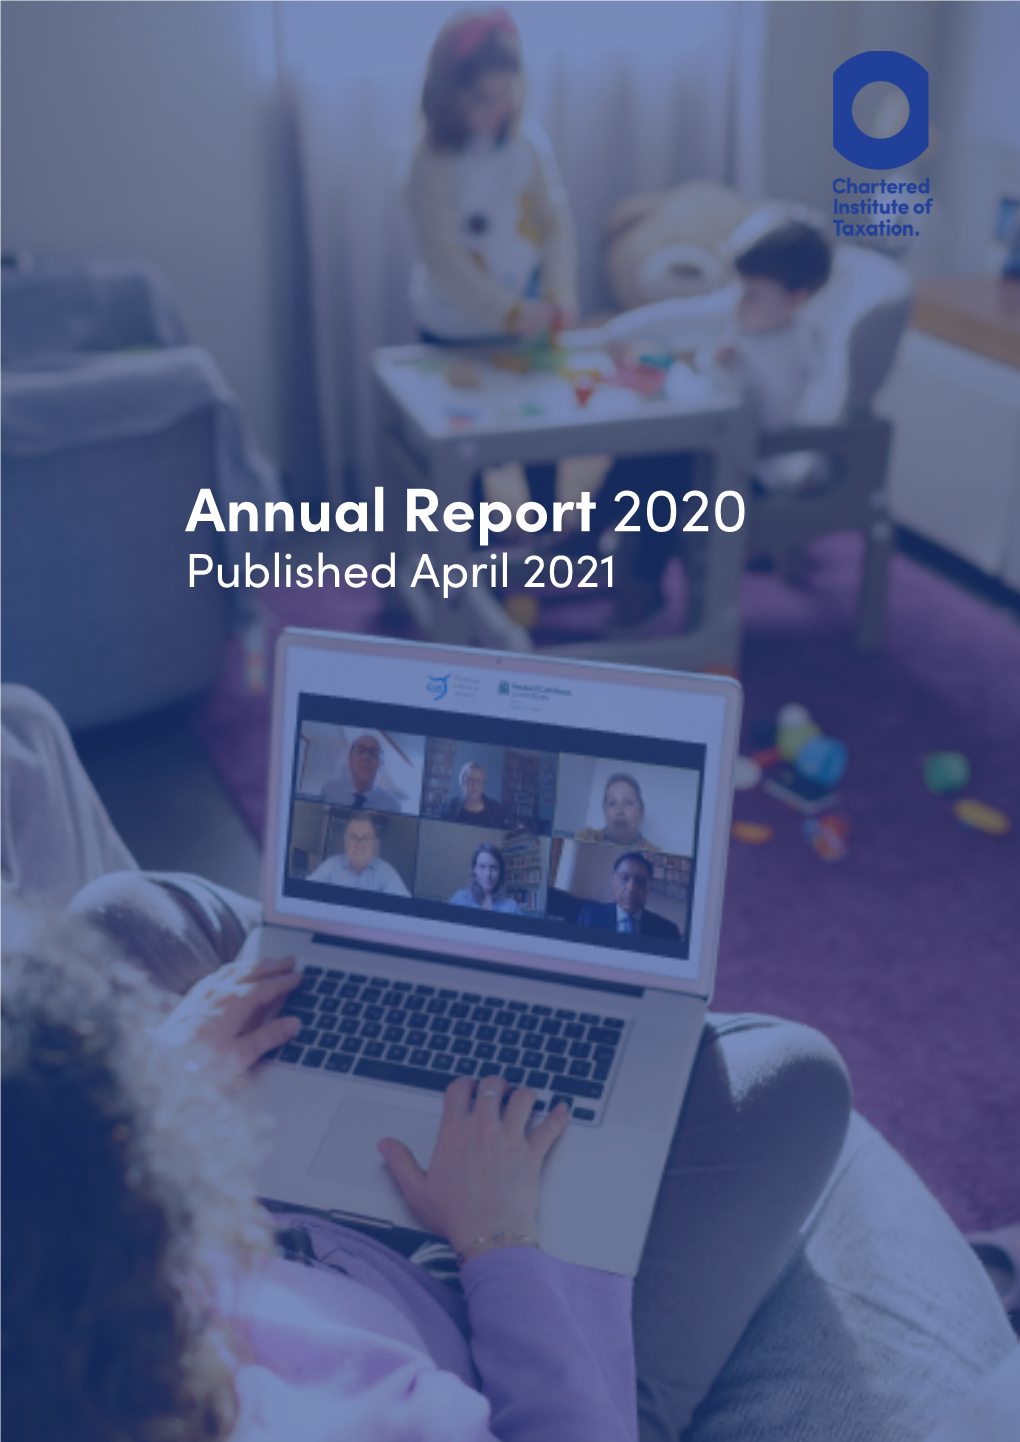 Annual Report 2020 Published April 2021 the CIOT in 2020